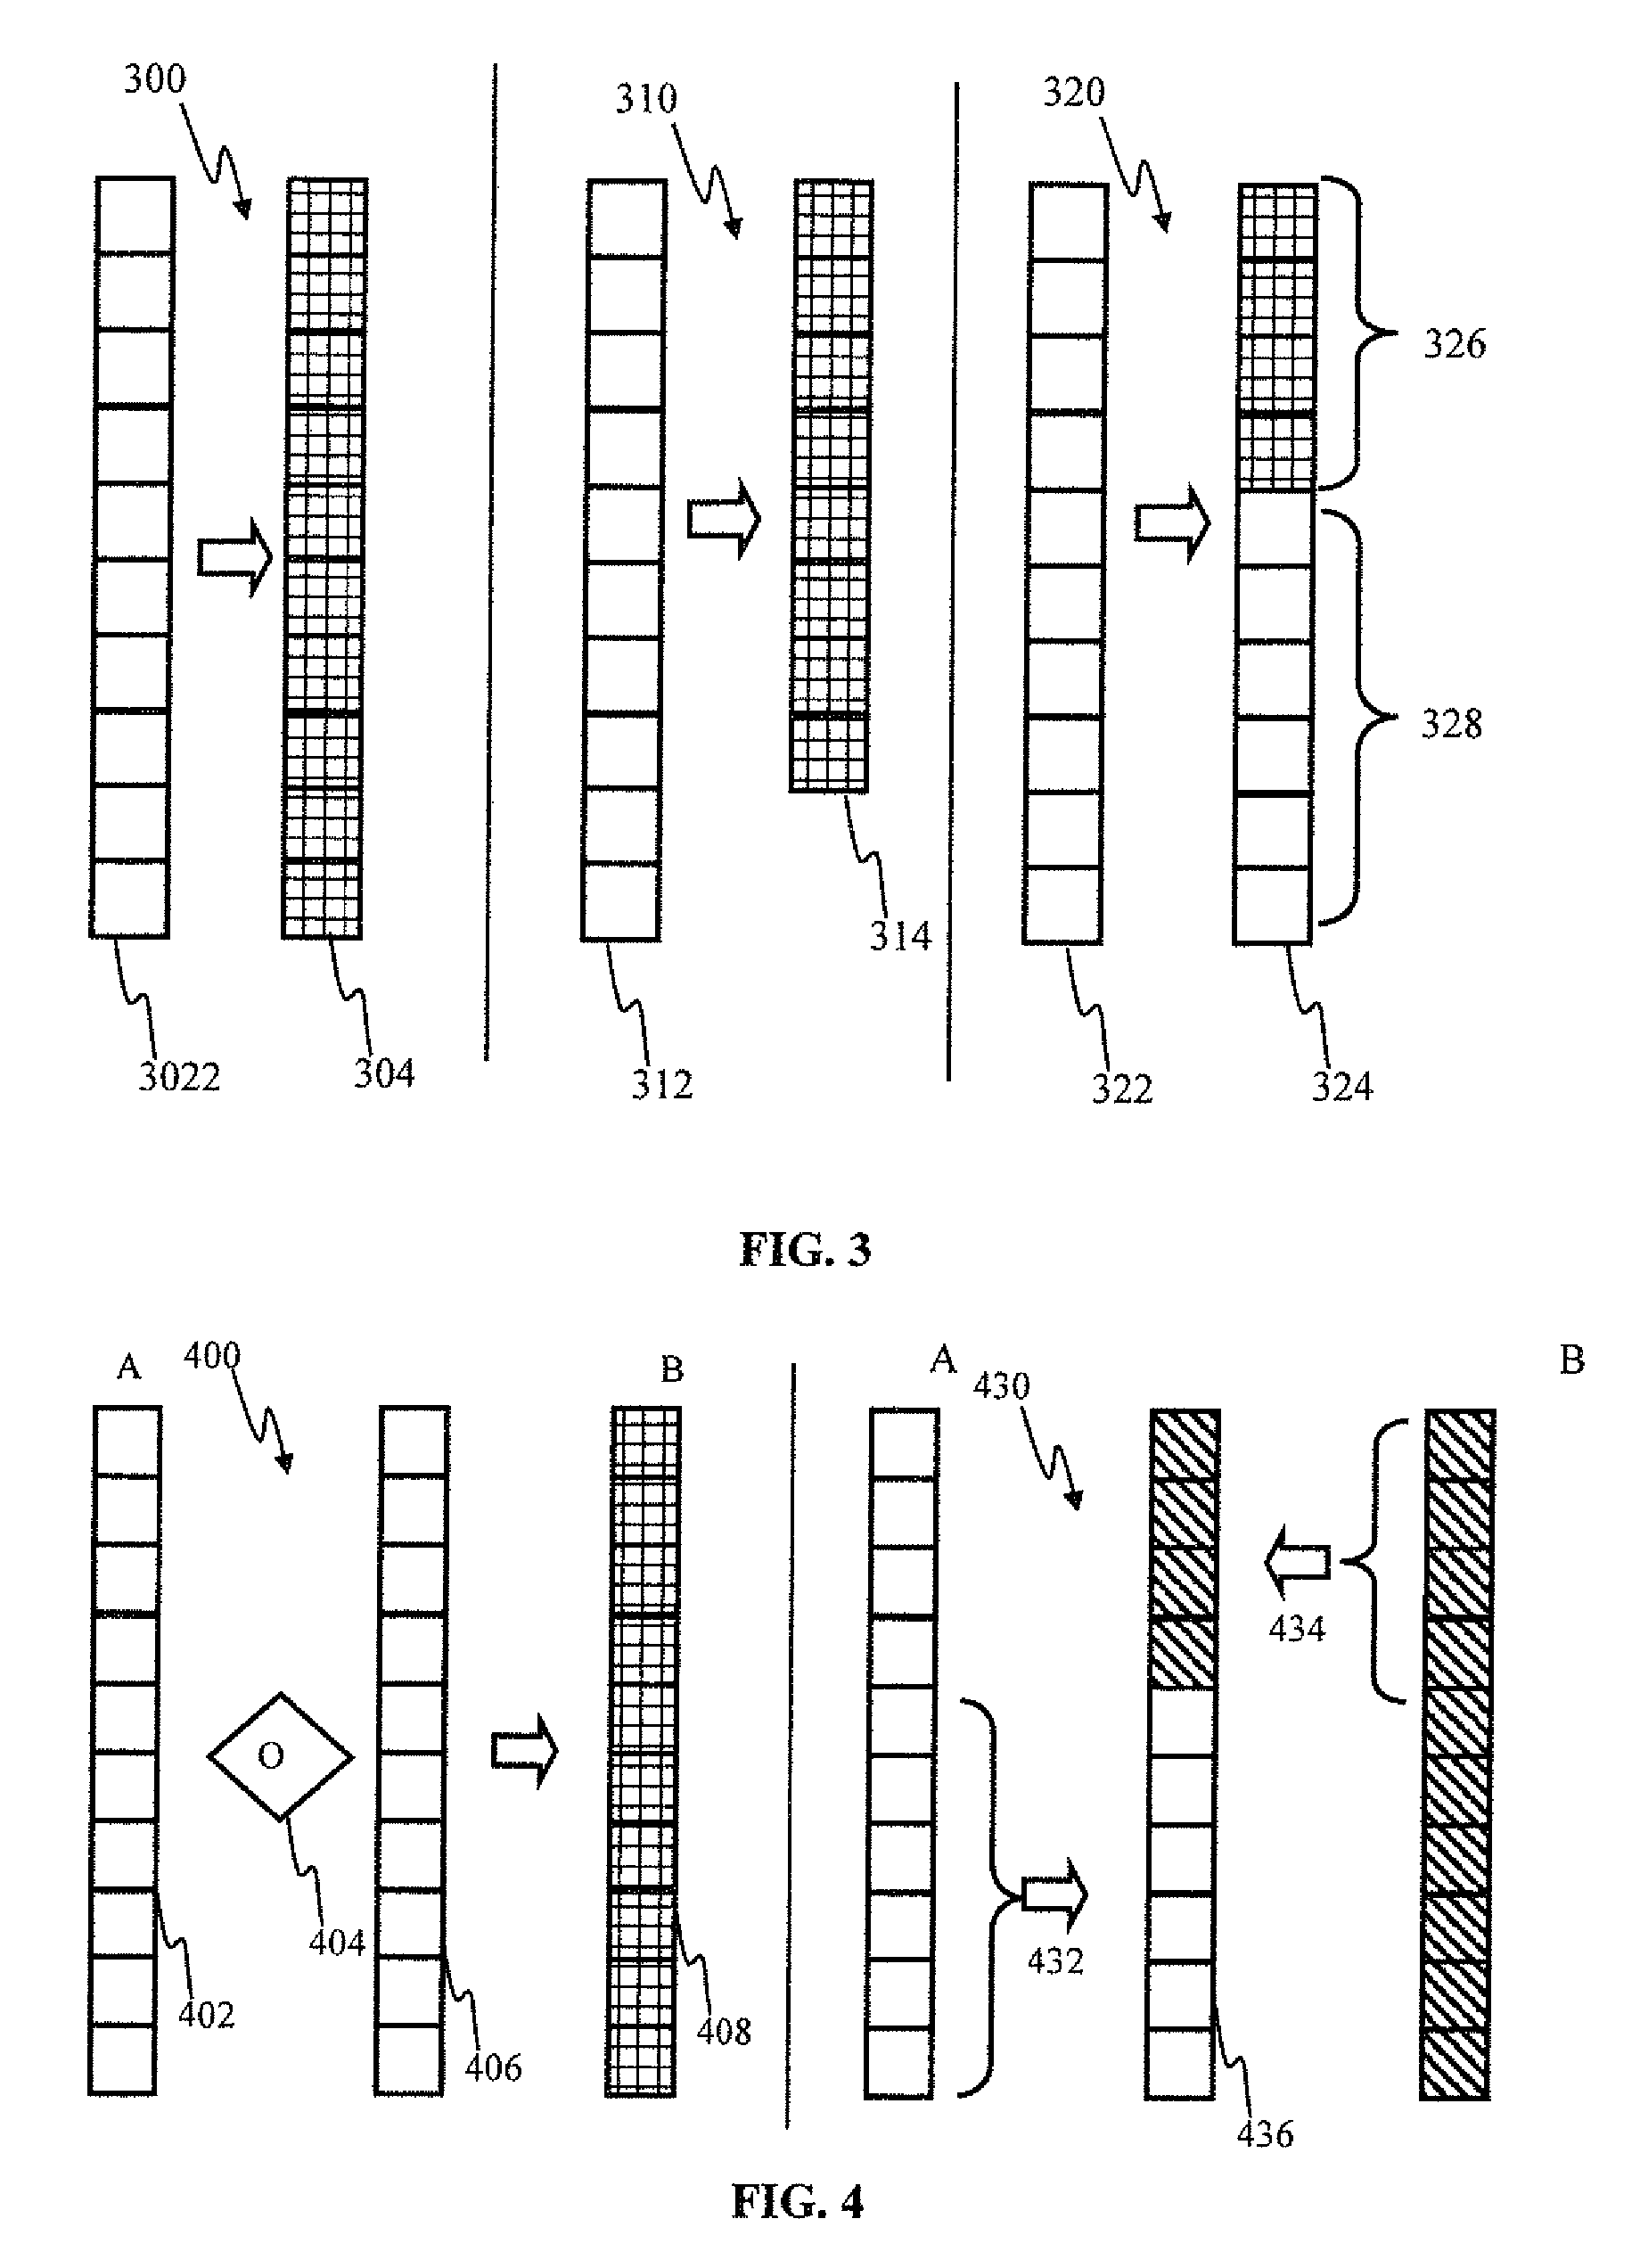 Neural network learning and collaboration apparatus and methods